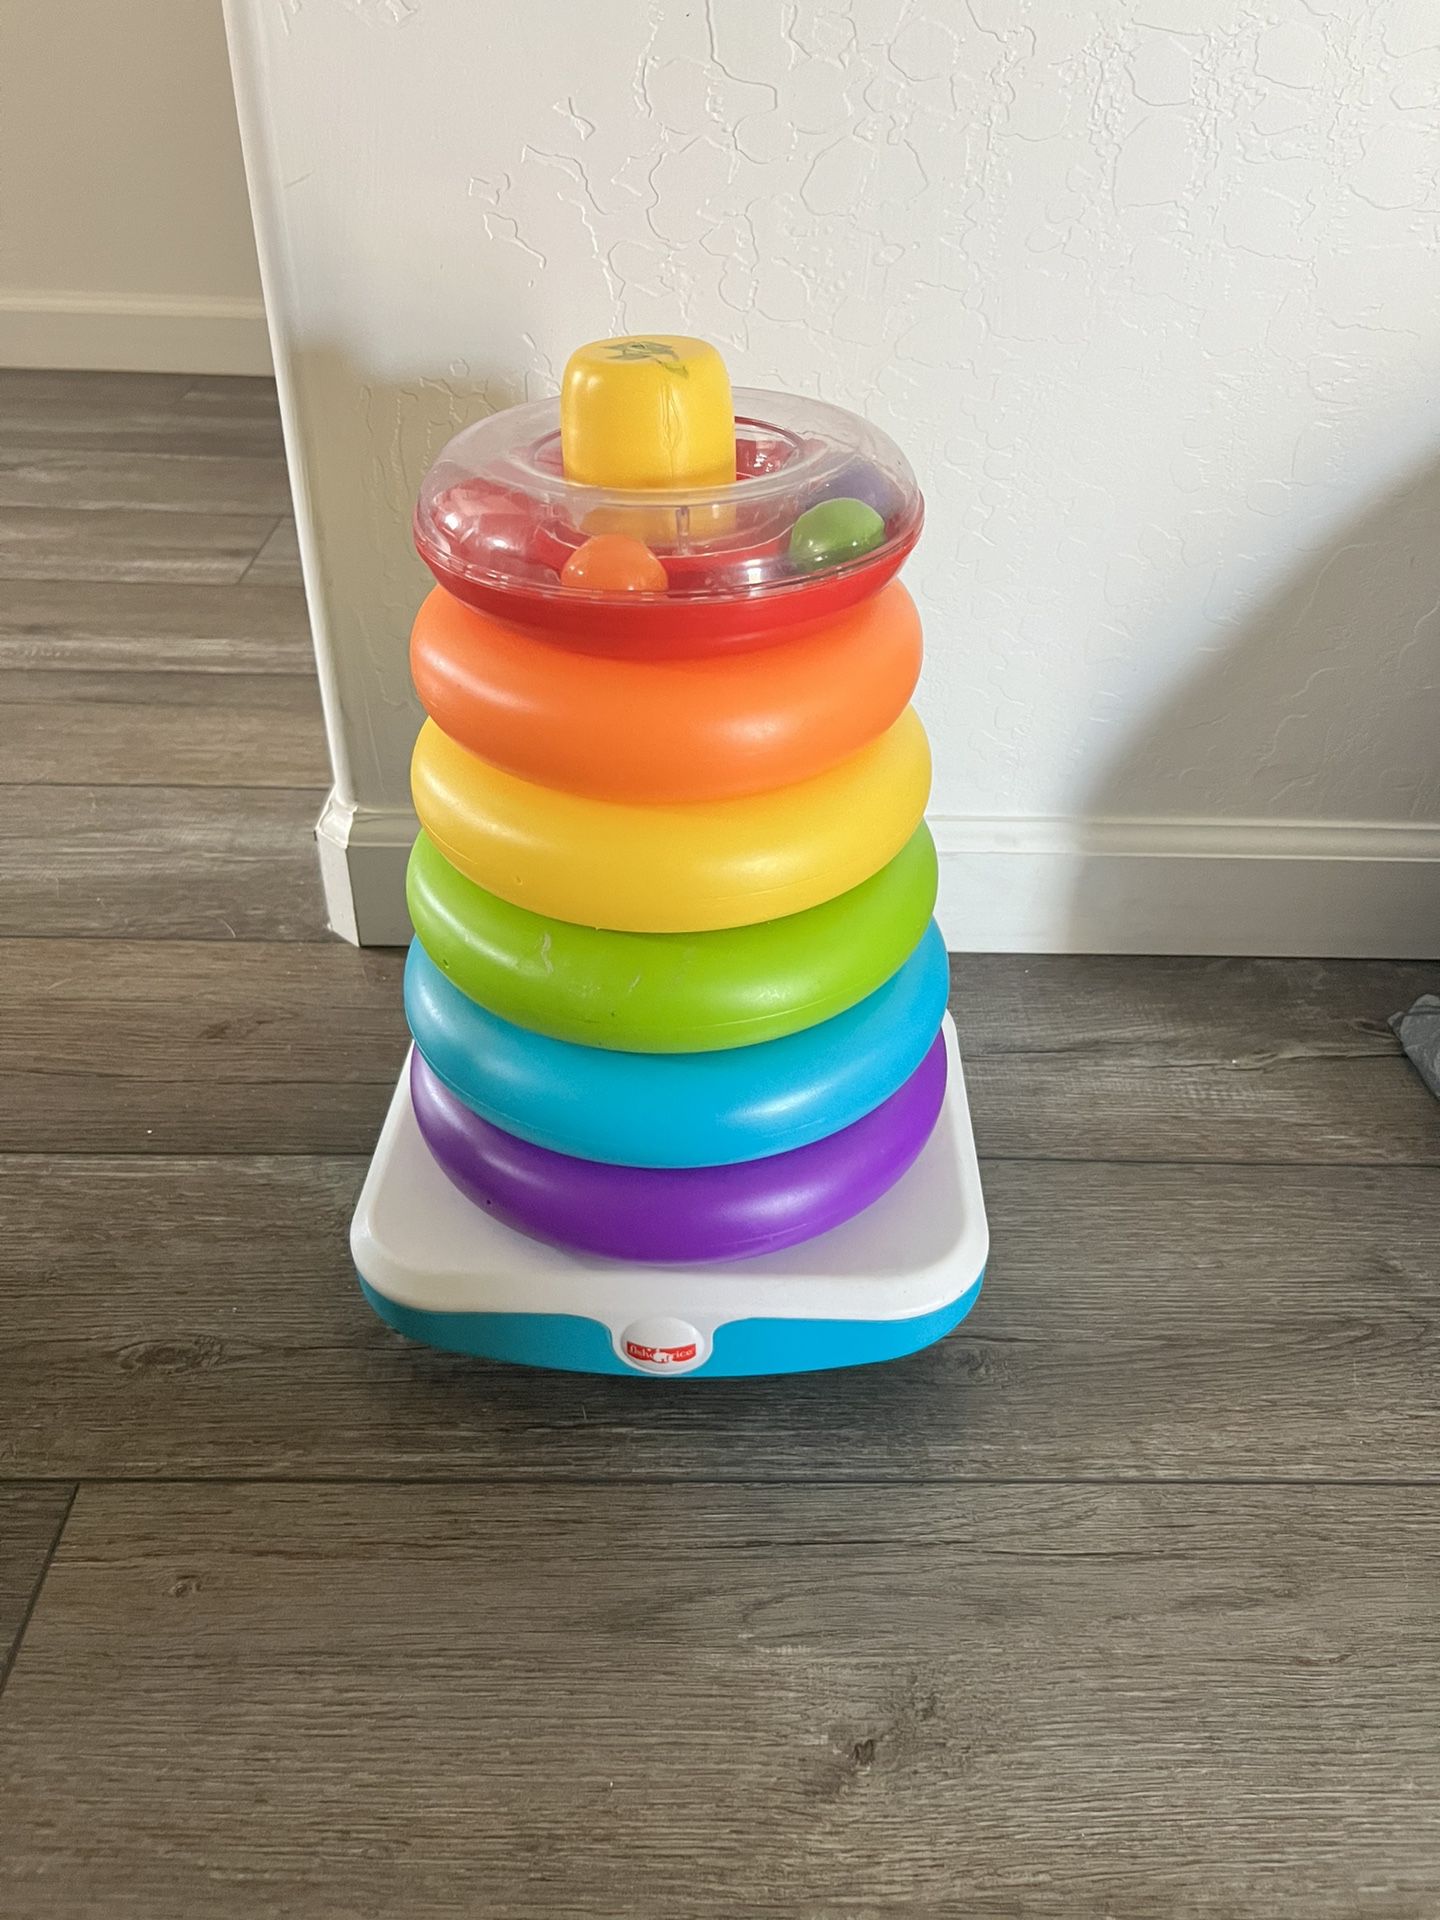 Baby Stacking Toy